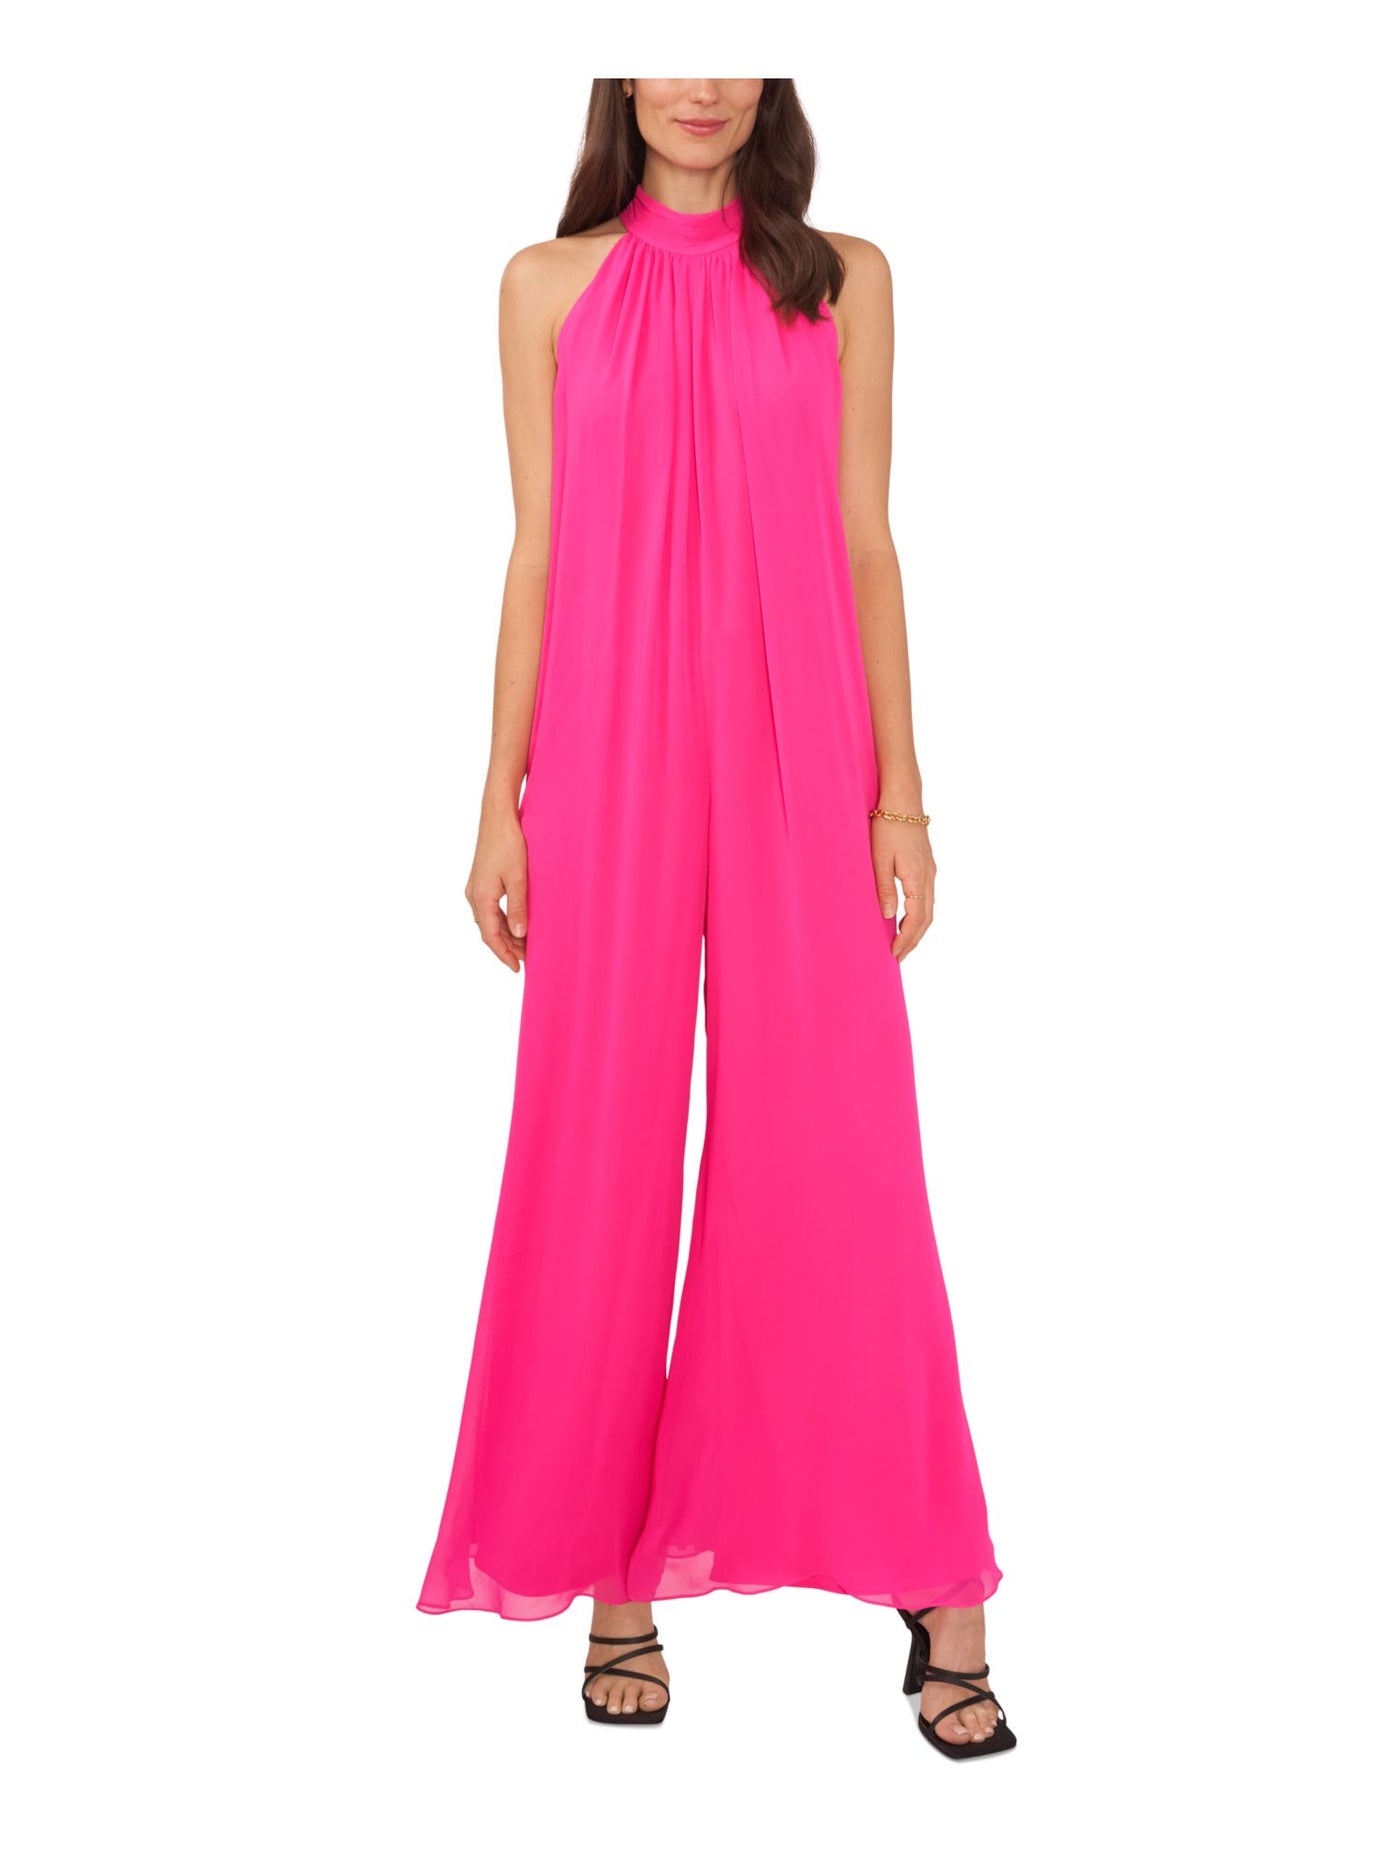 VINCE CAMUTO Womens Pink Pleated Zippered Draped Front Tie Back Lined Sleeveless Halter Party Wide Leg Jumpsuit Plus 1X